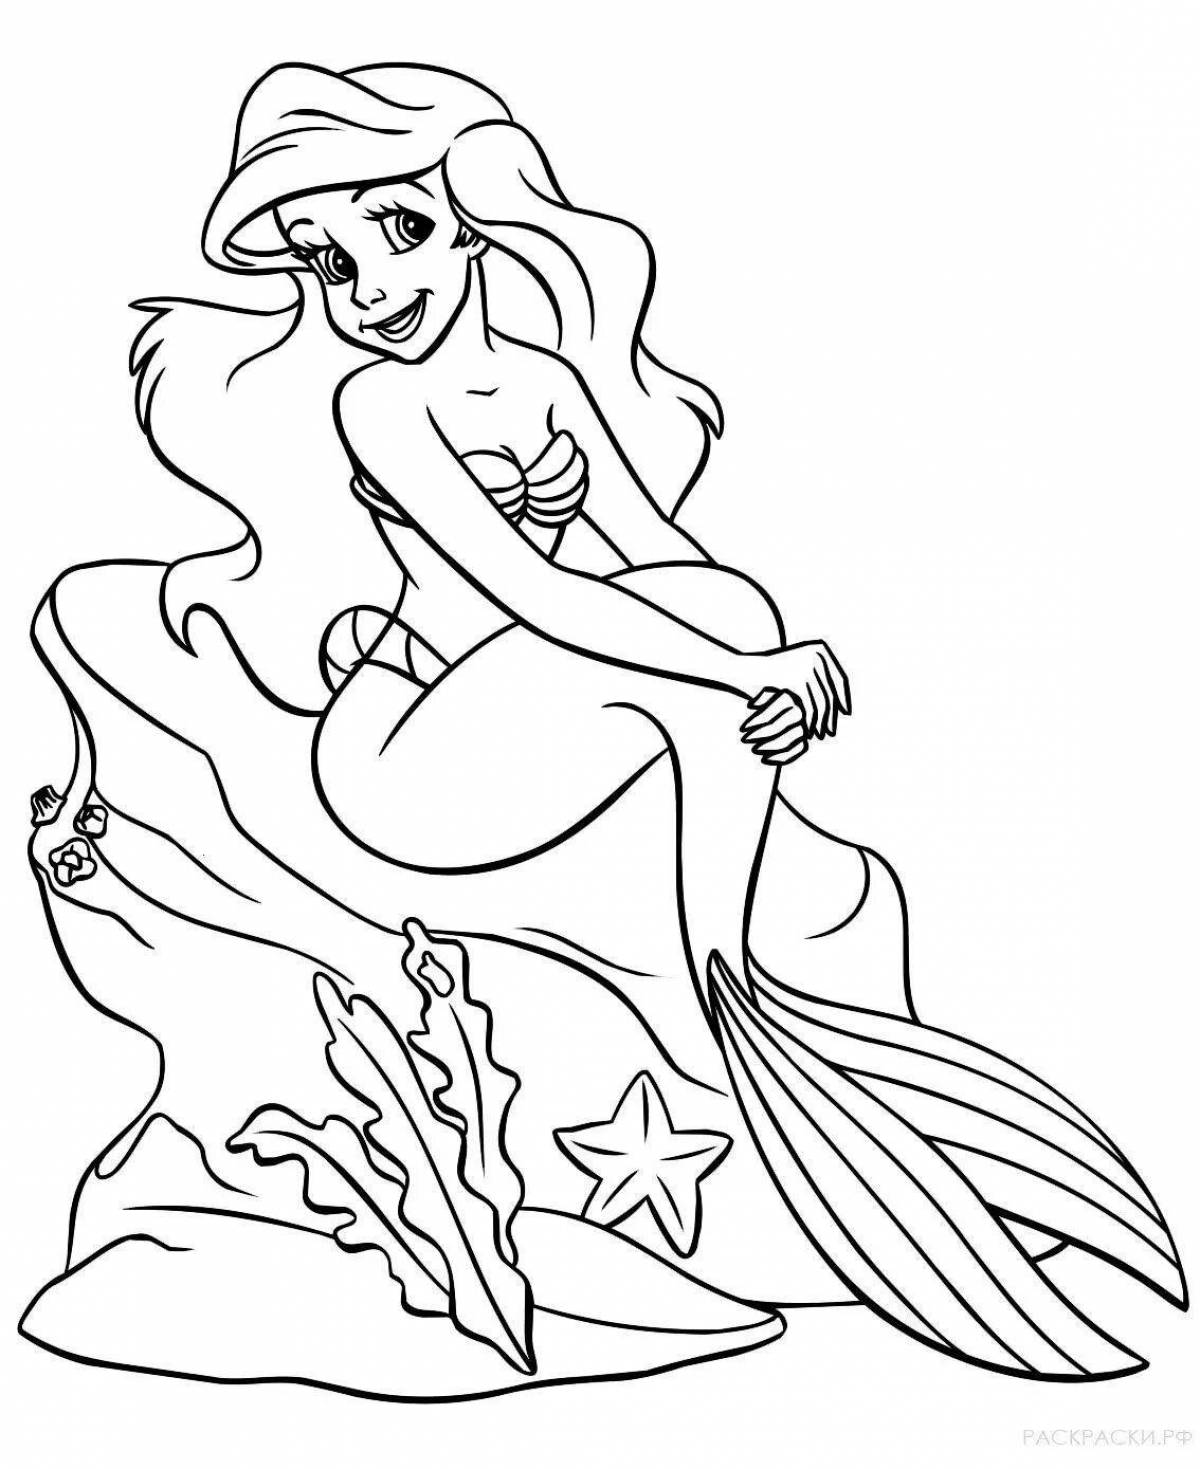 Awesome ariel coloring book for kids